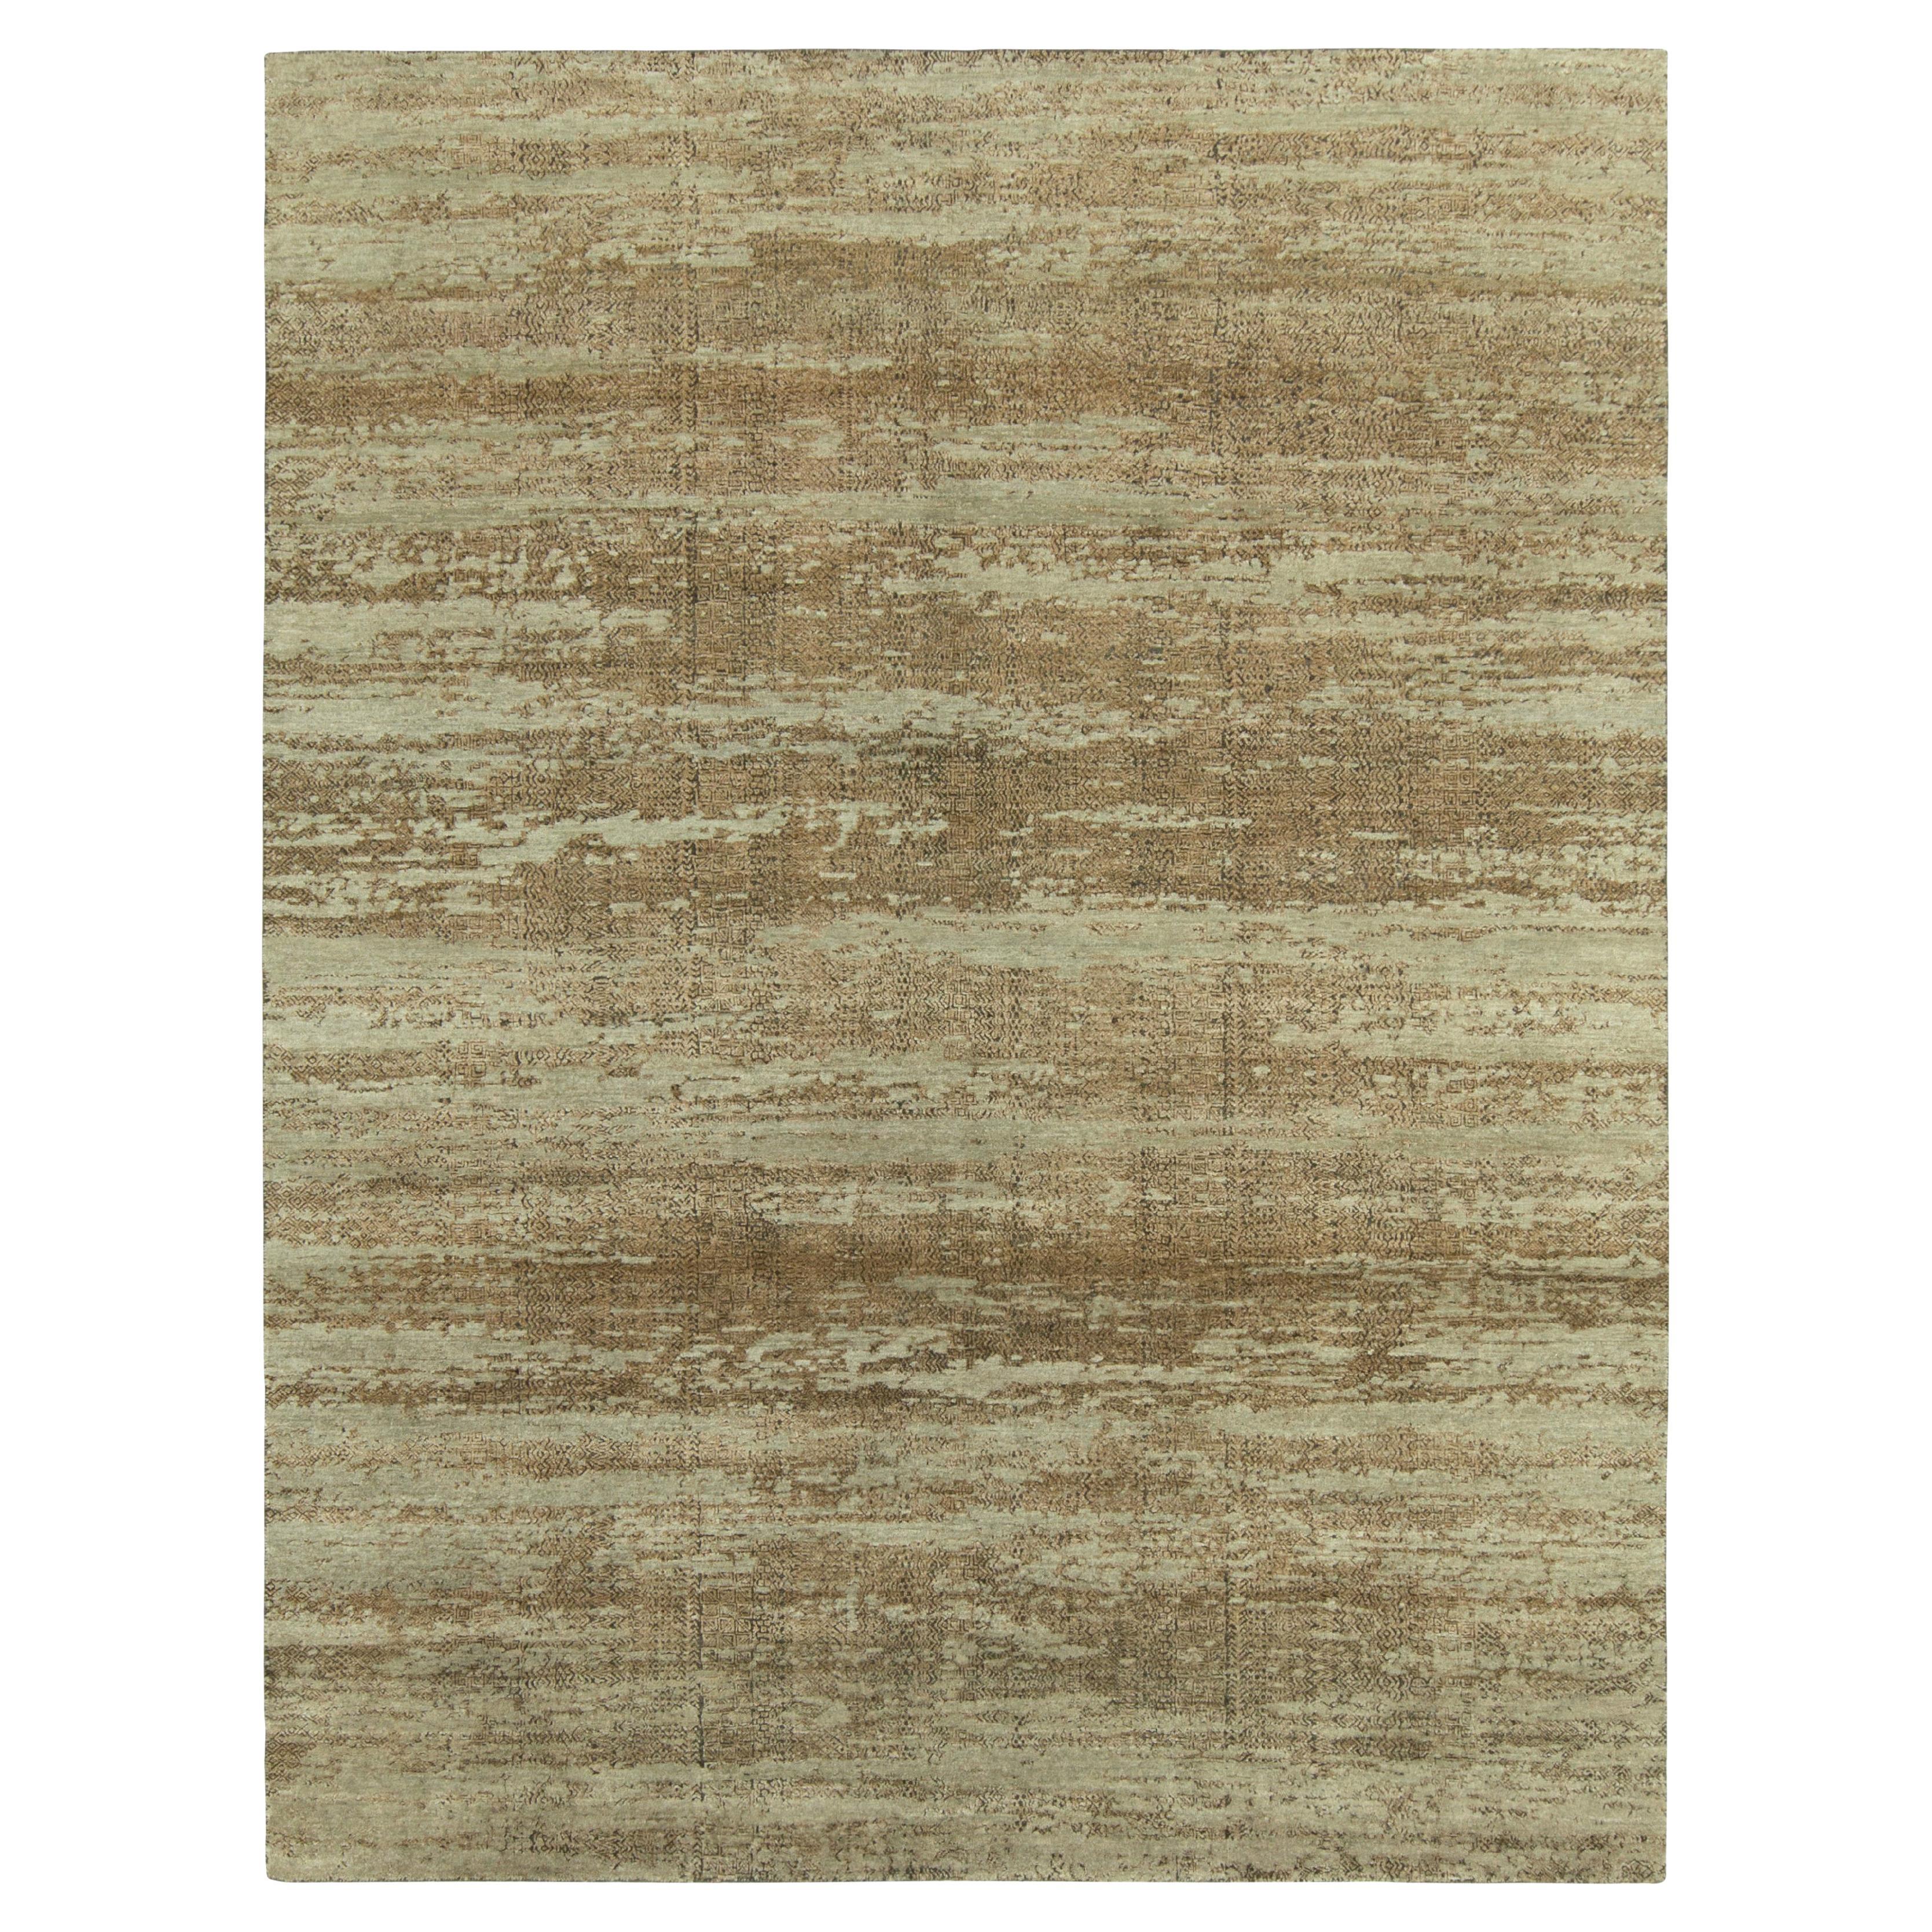 Rug & Kilim’s Contemporary Abstract Rug in Beige-Brown with Green Undertone